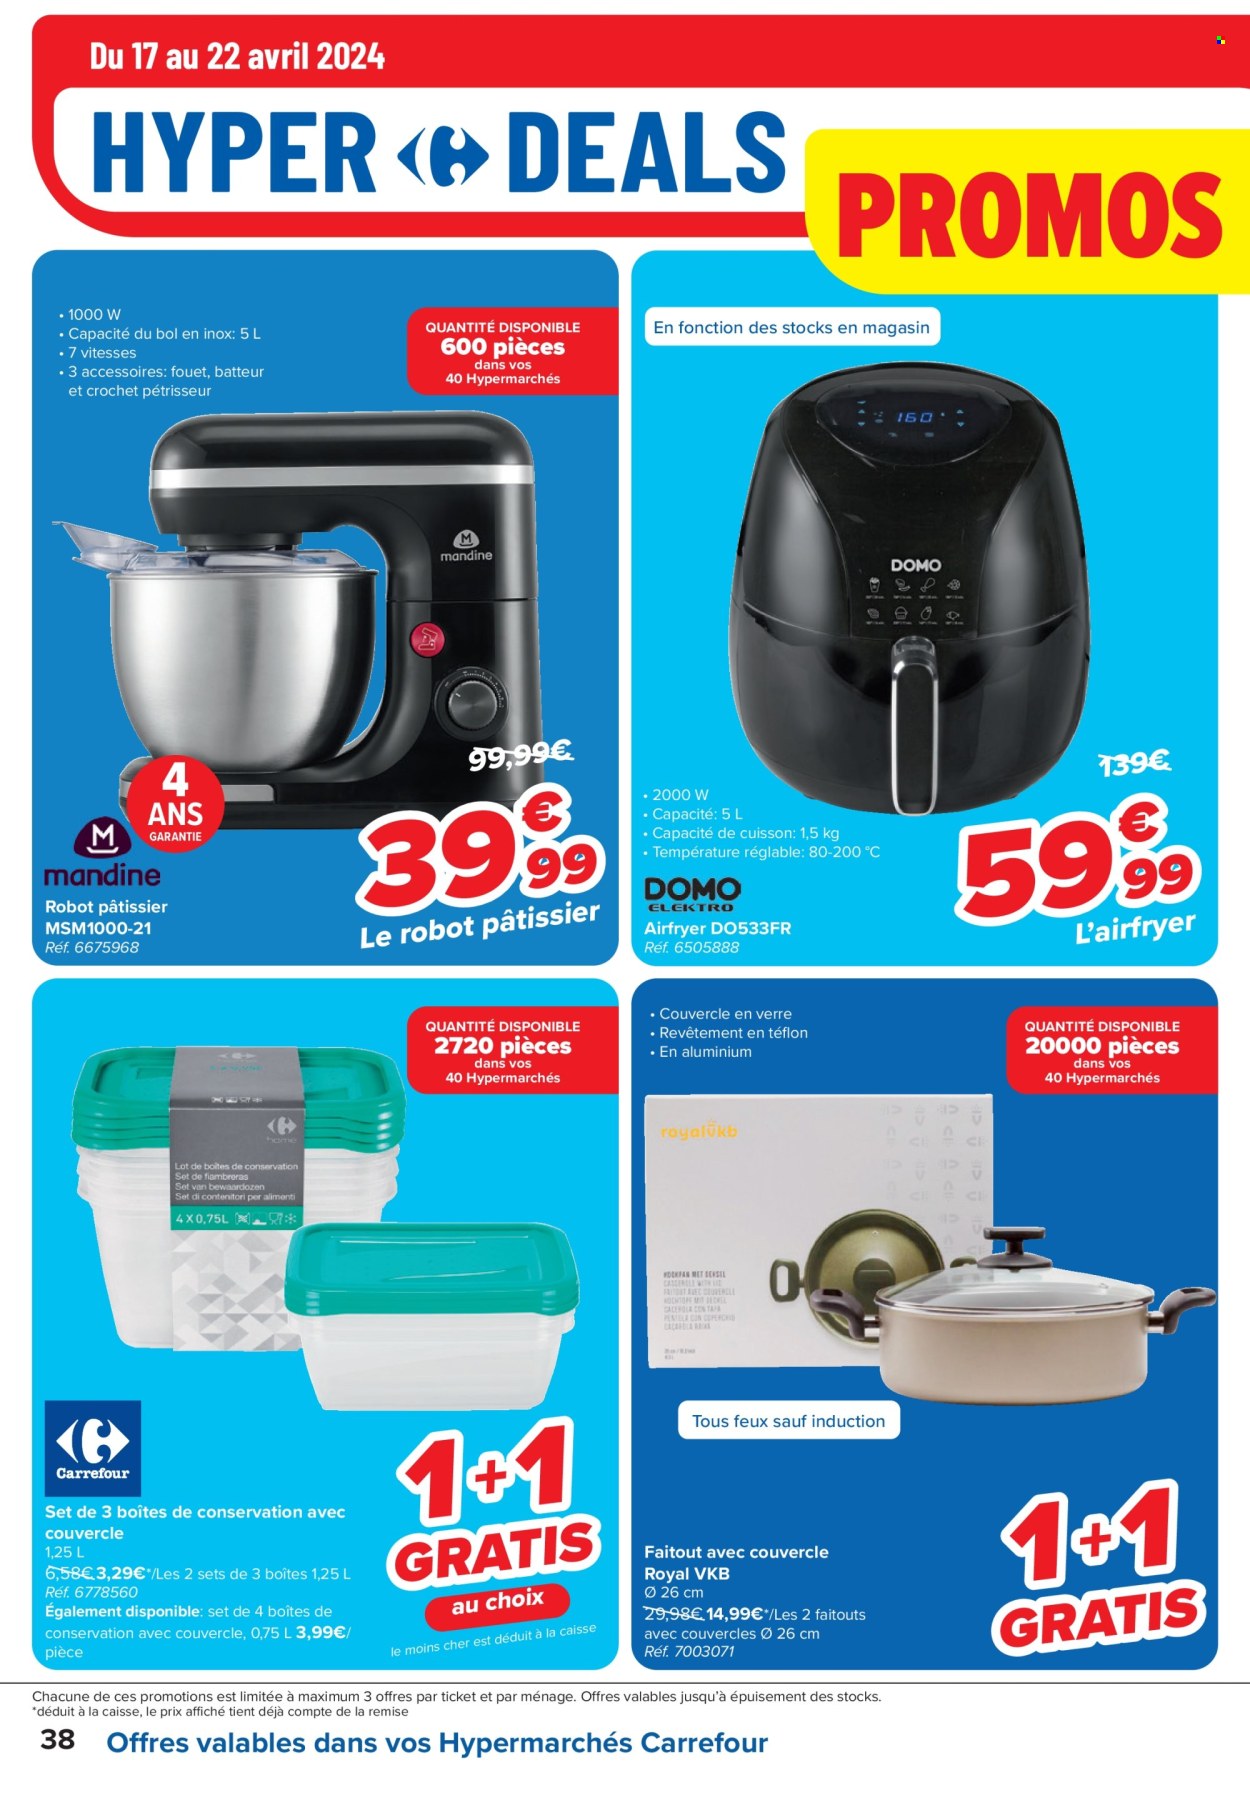 Catalogue Carrefour hypermarkt - 17.4.2024 - 29.4.2024. Page 38.